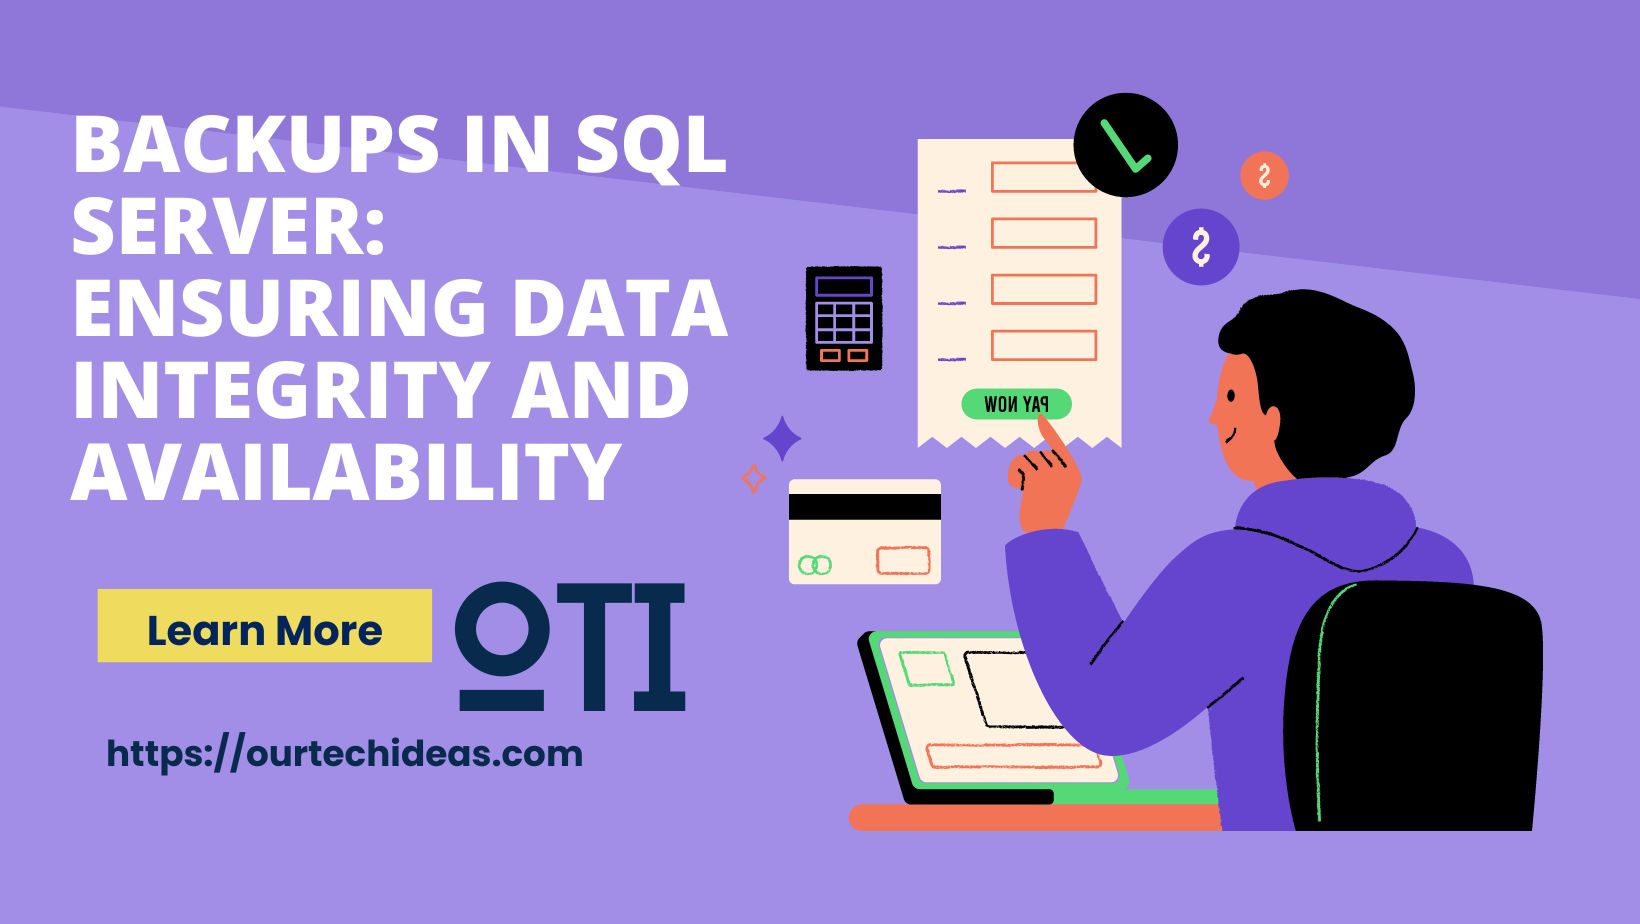 Backups in SQL Server: Ensuring Data Integrity and Availability